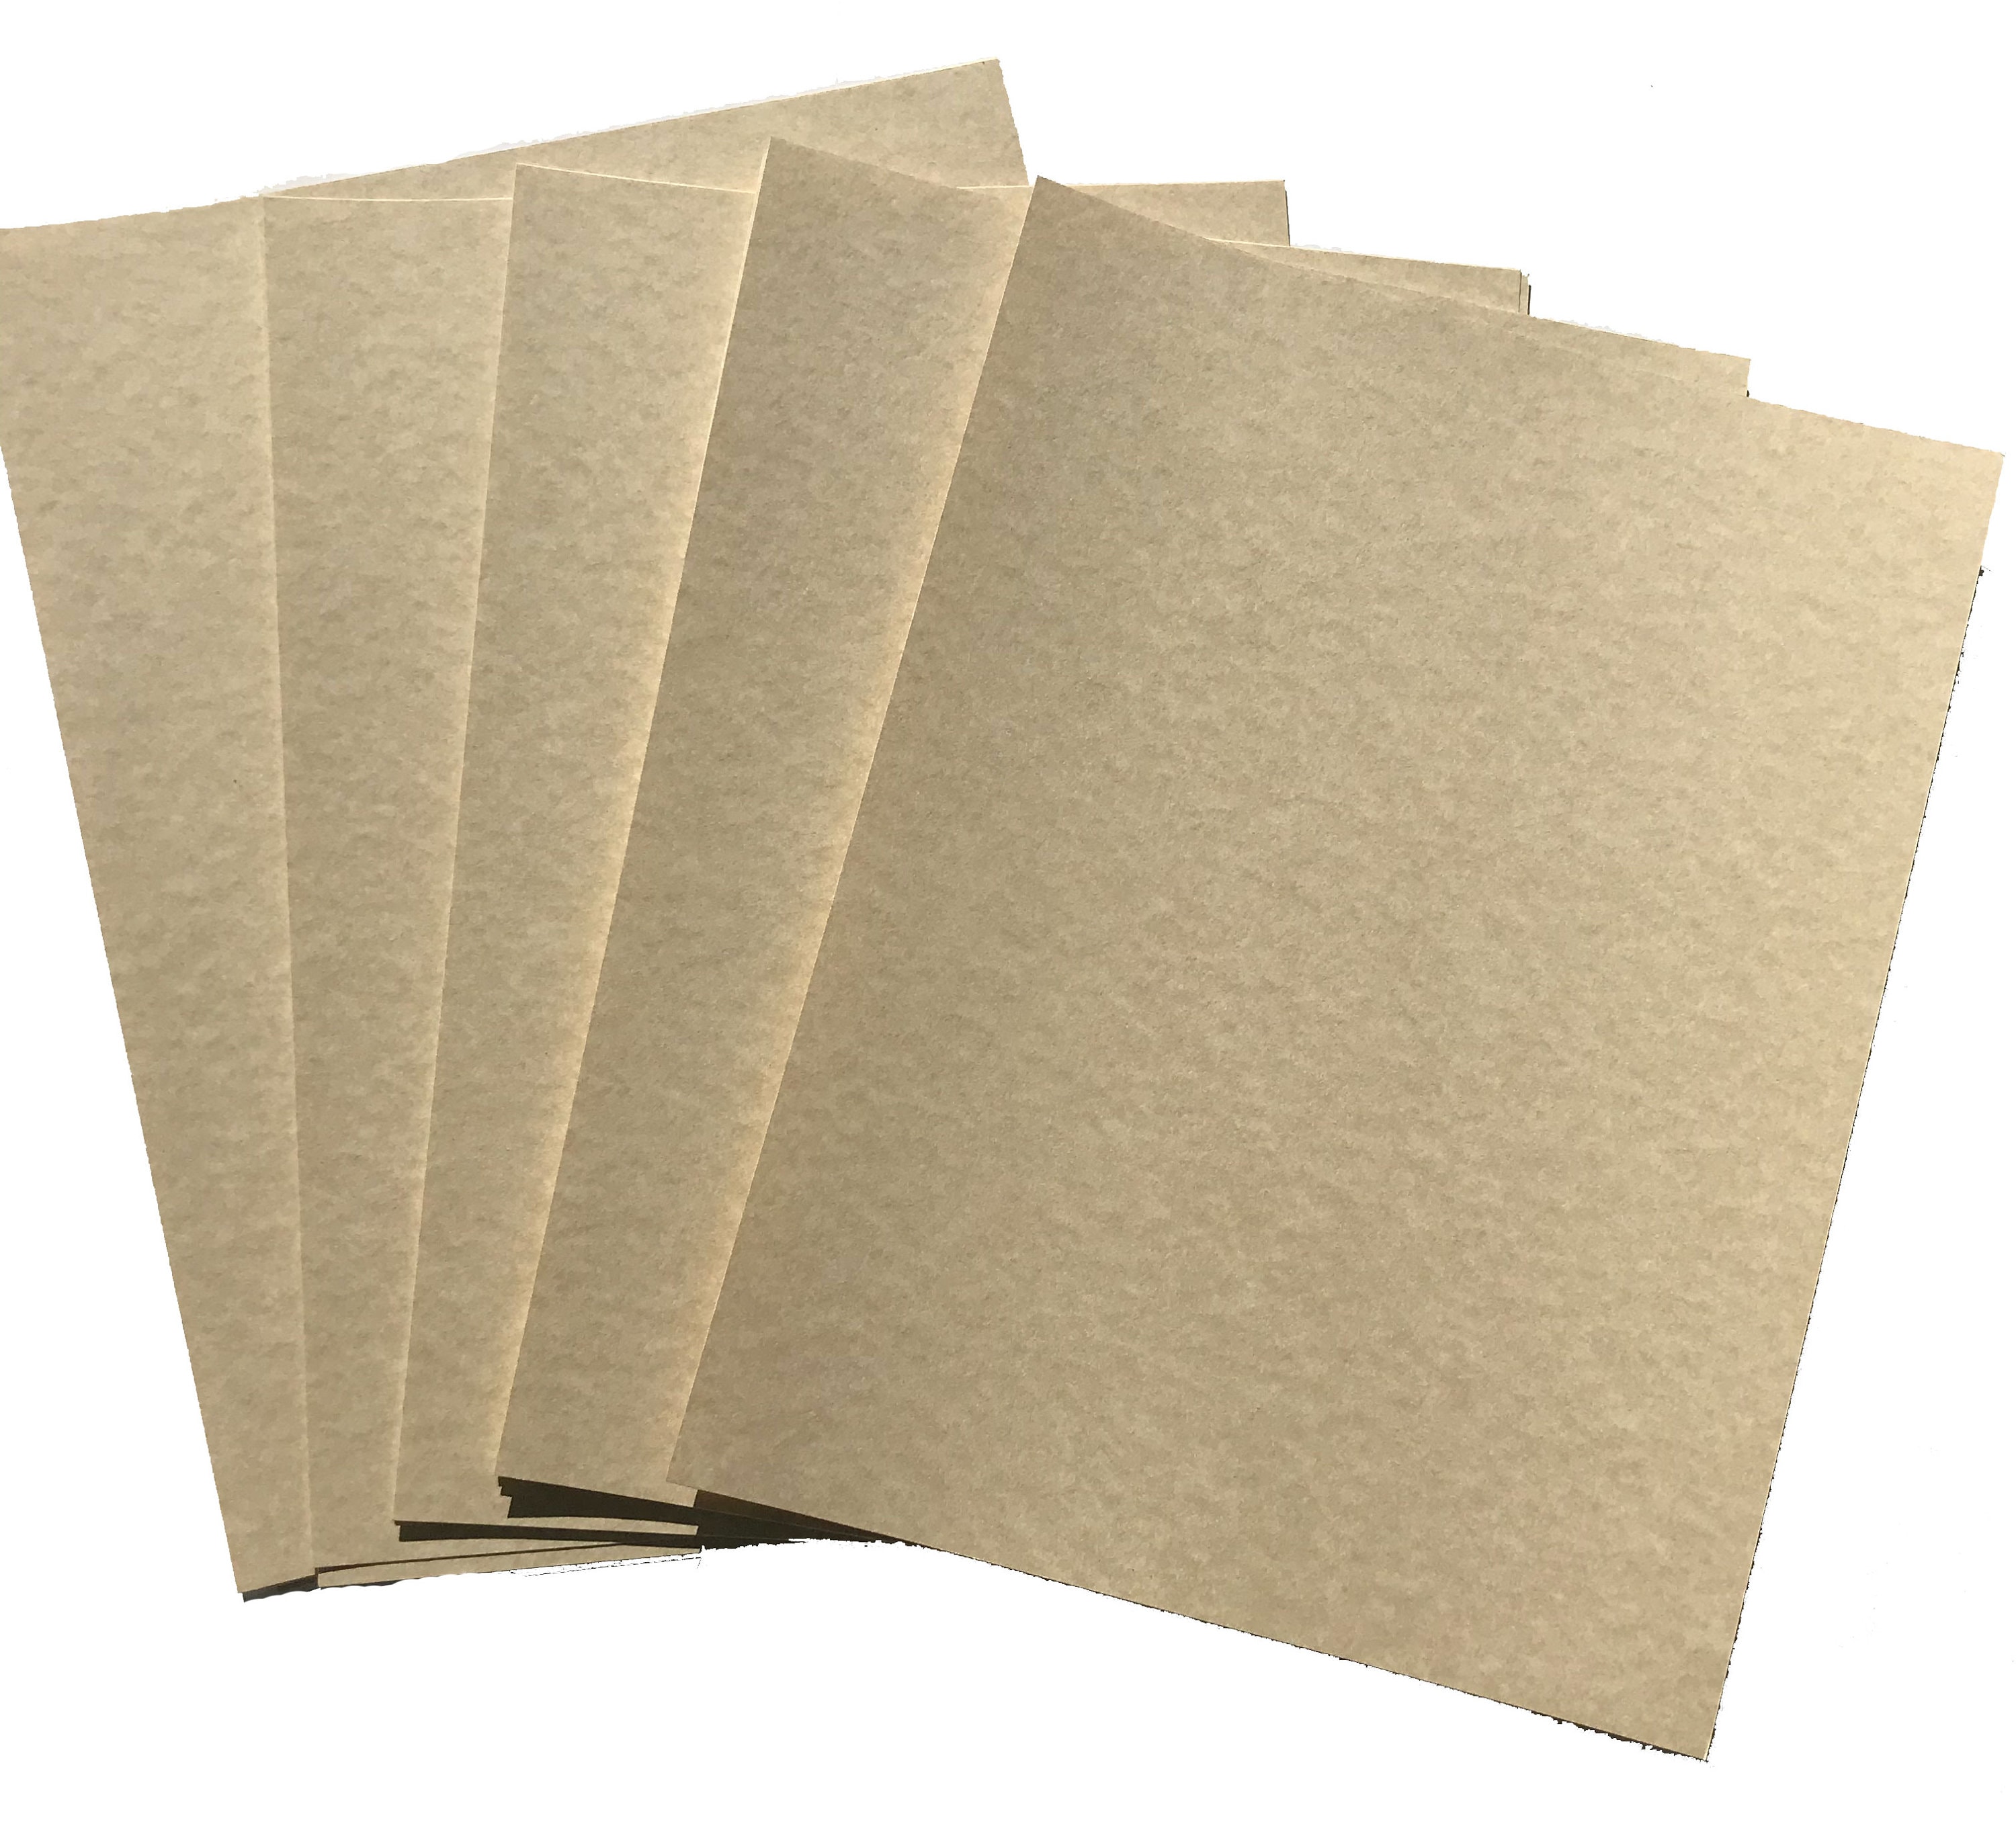 Blue Card Stock - 8 1/2 x 11 in 65 lb Cover Vellum 30% Recycled